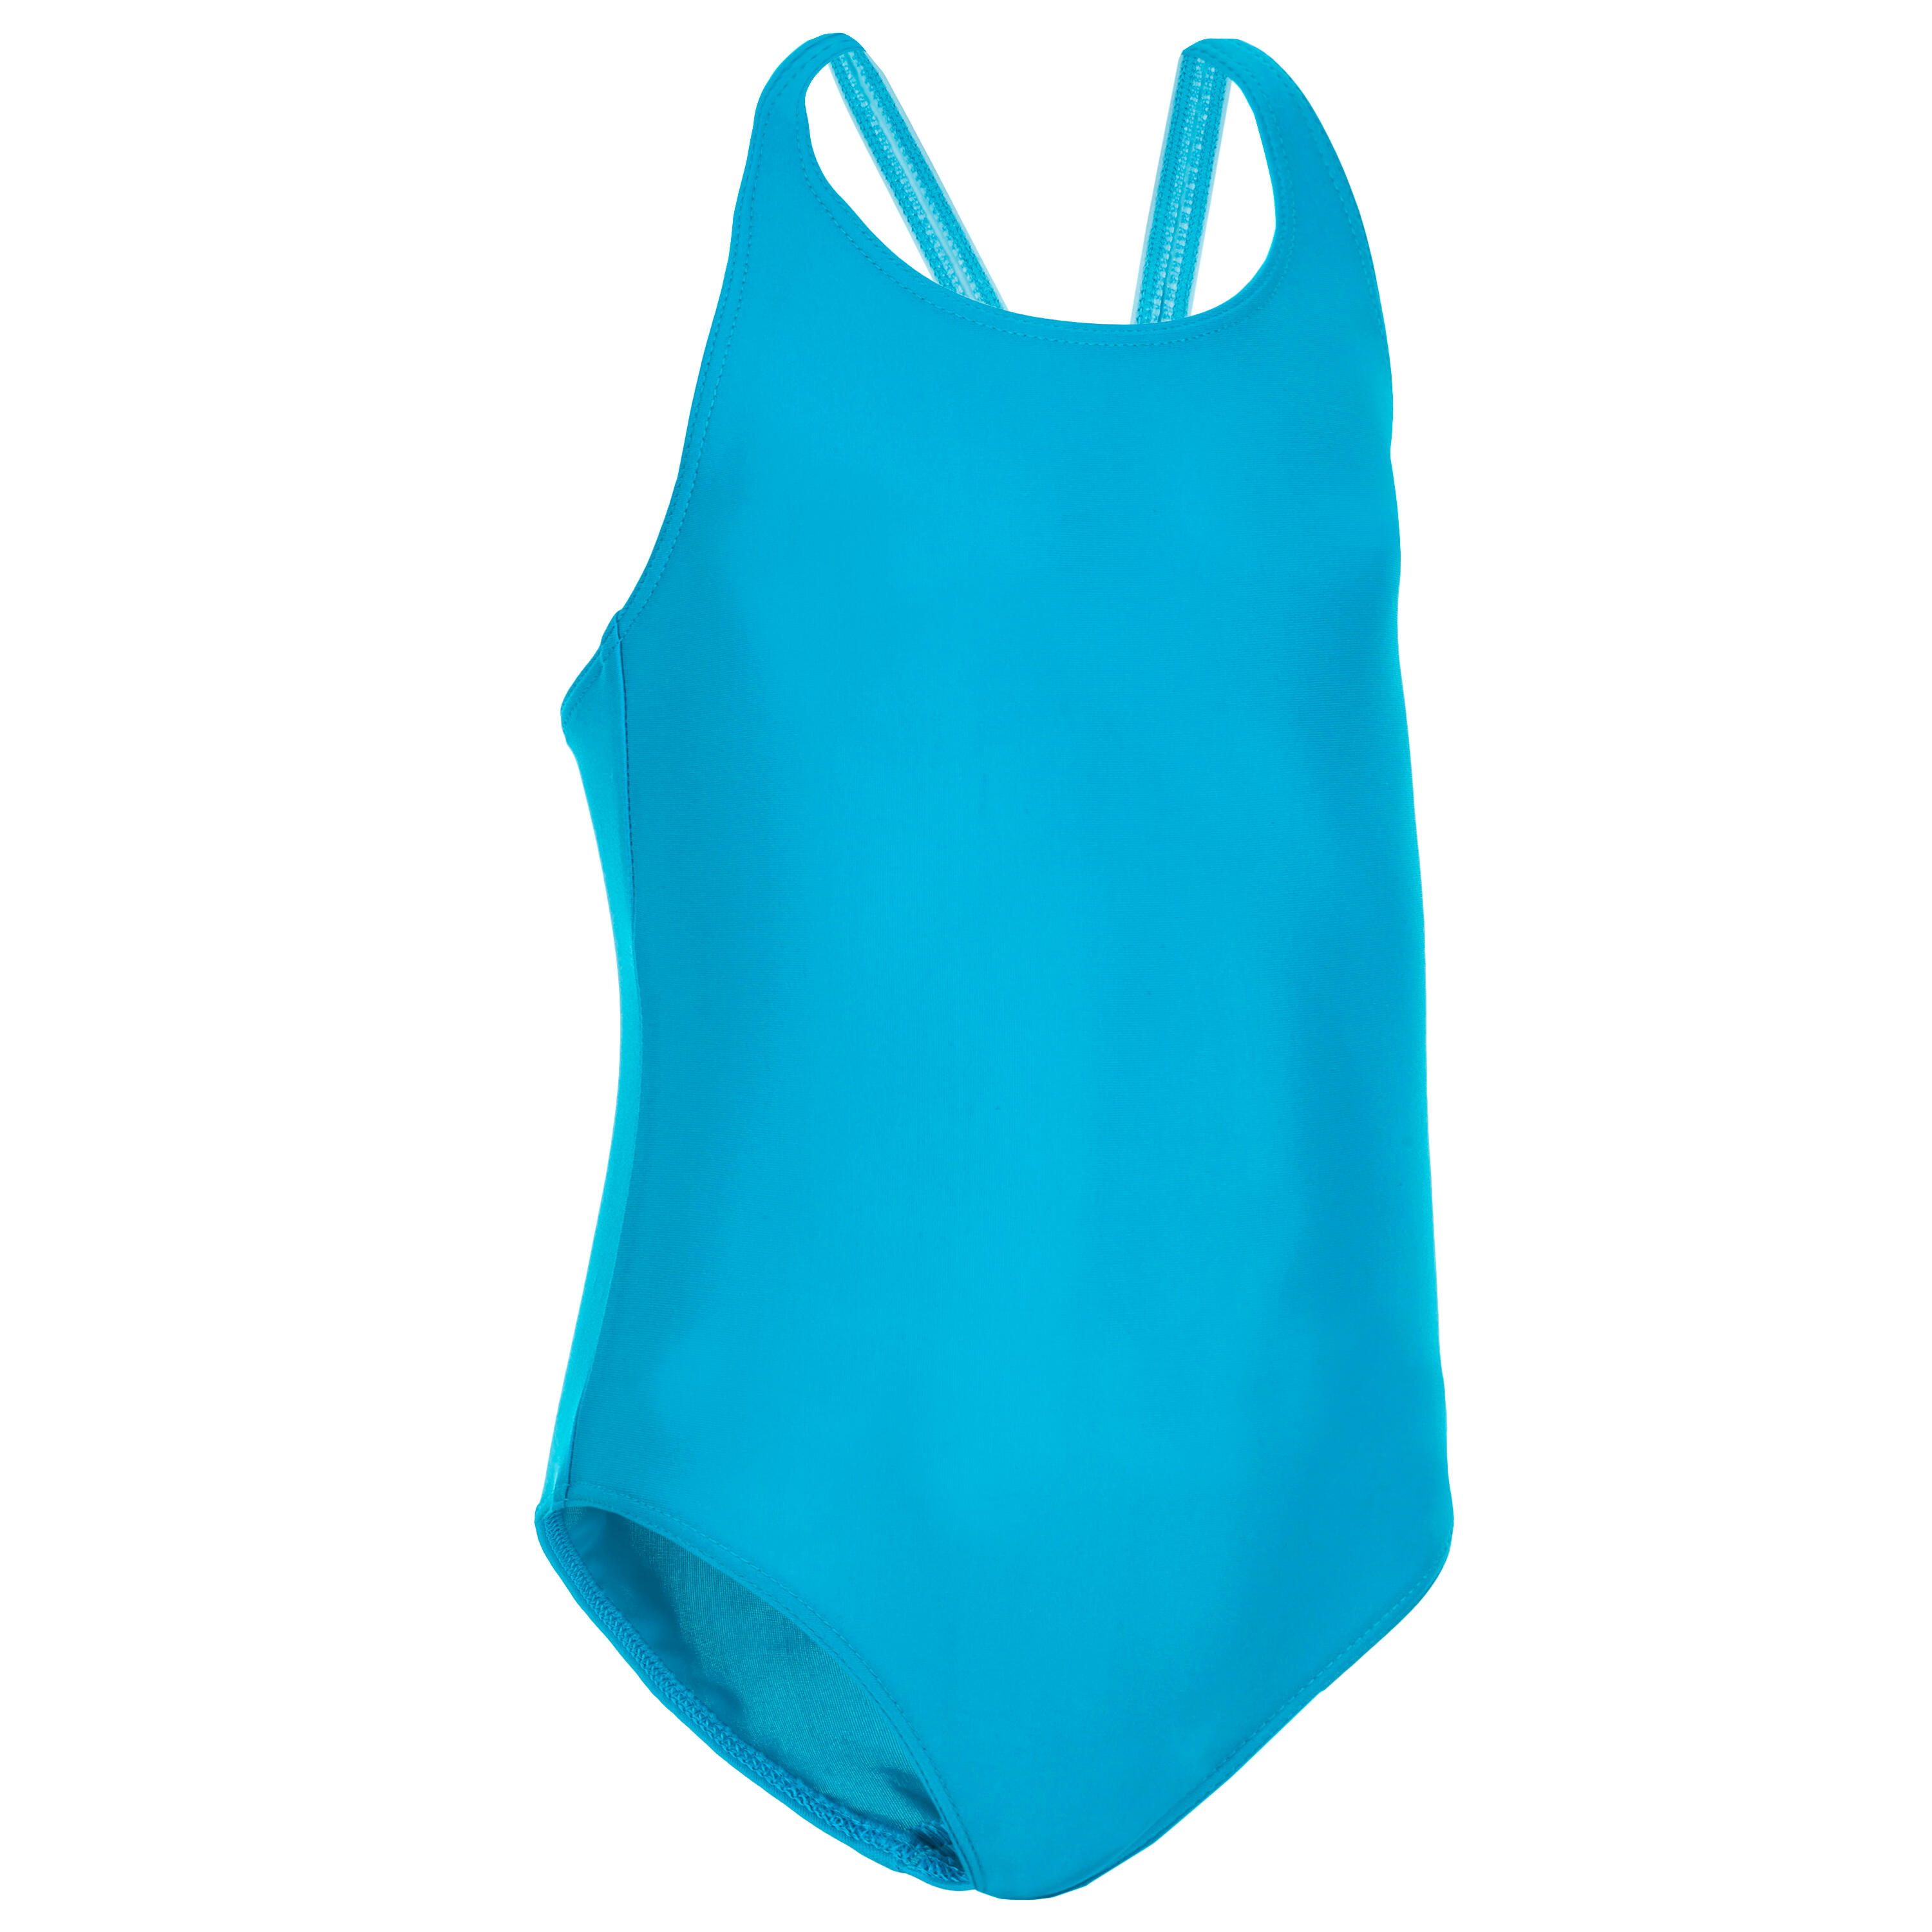 Baby Girls' One-Piece Swimsuit - Blue 1/3